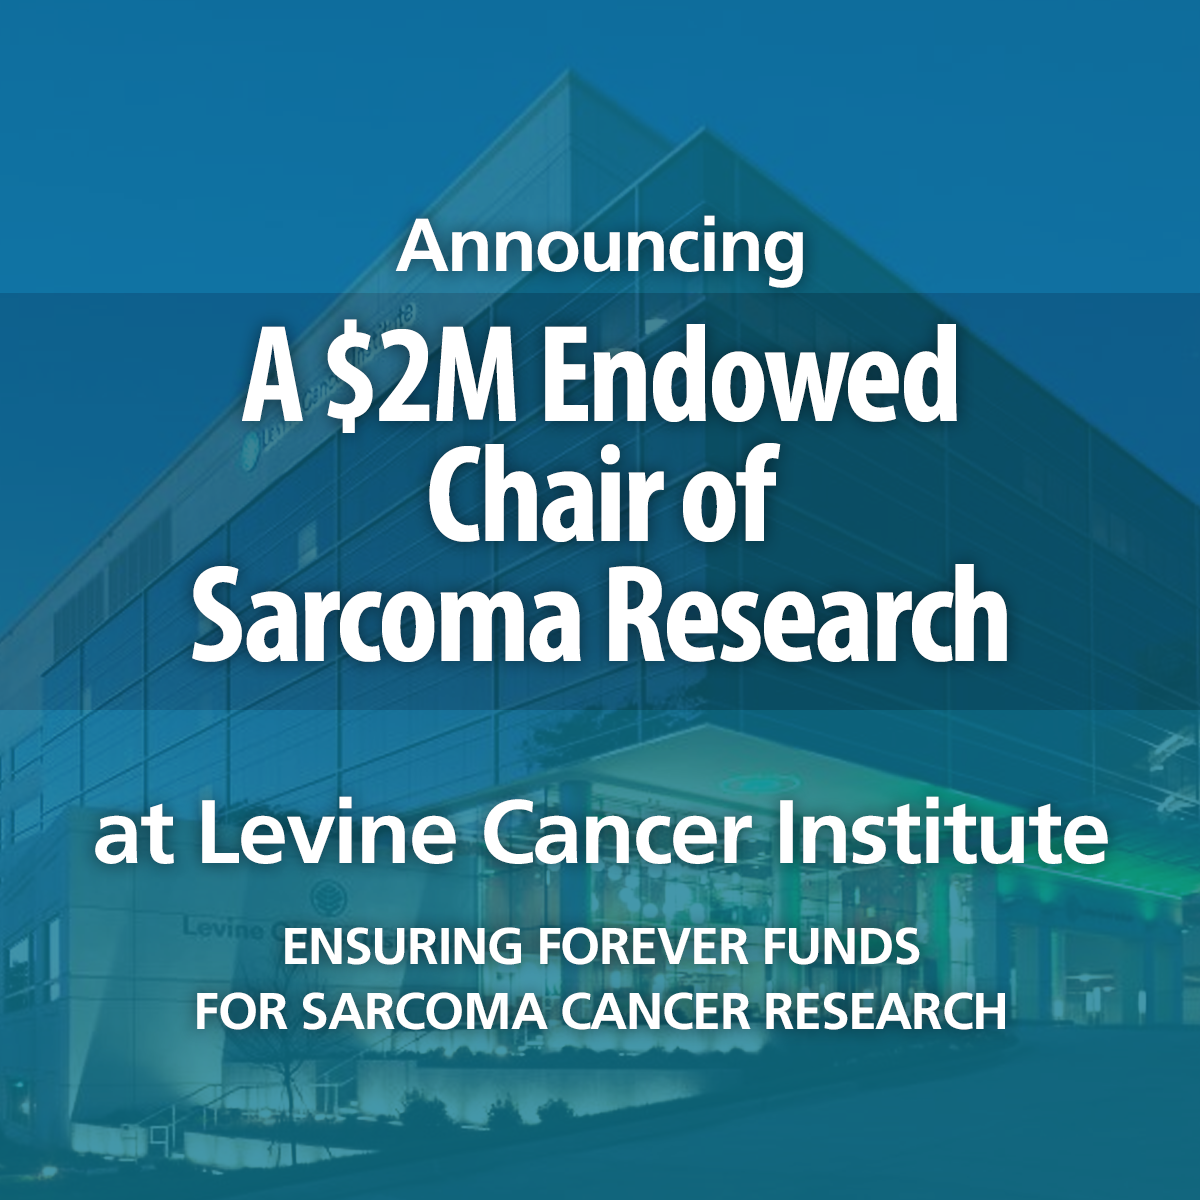 endowed chair of sarcoma research at levine cancer institute